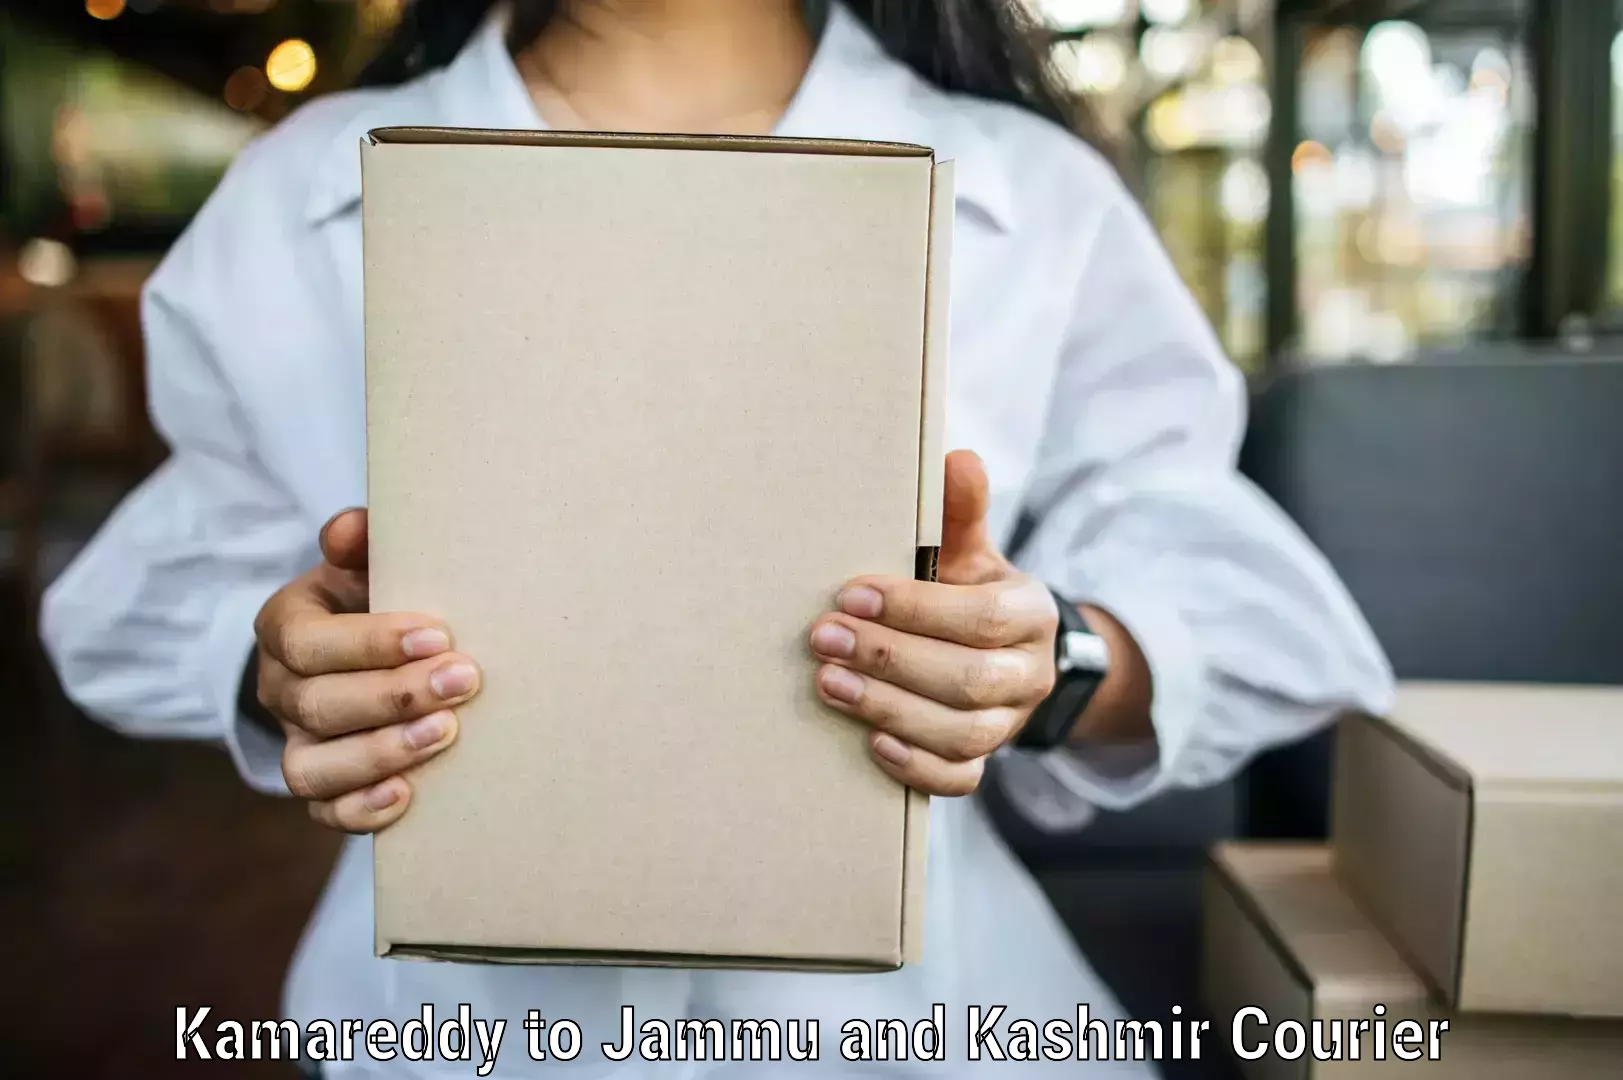 State-of-the-art courier technology Kamareddy to Udhampur